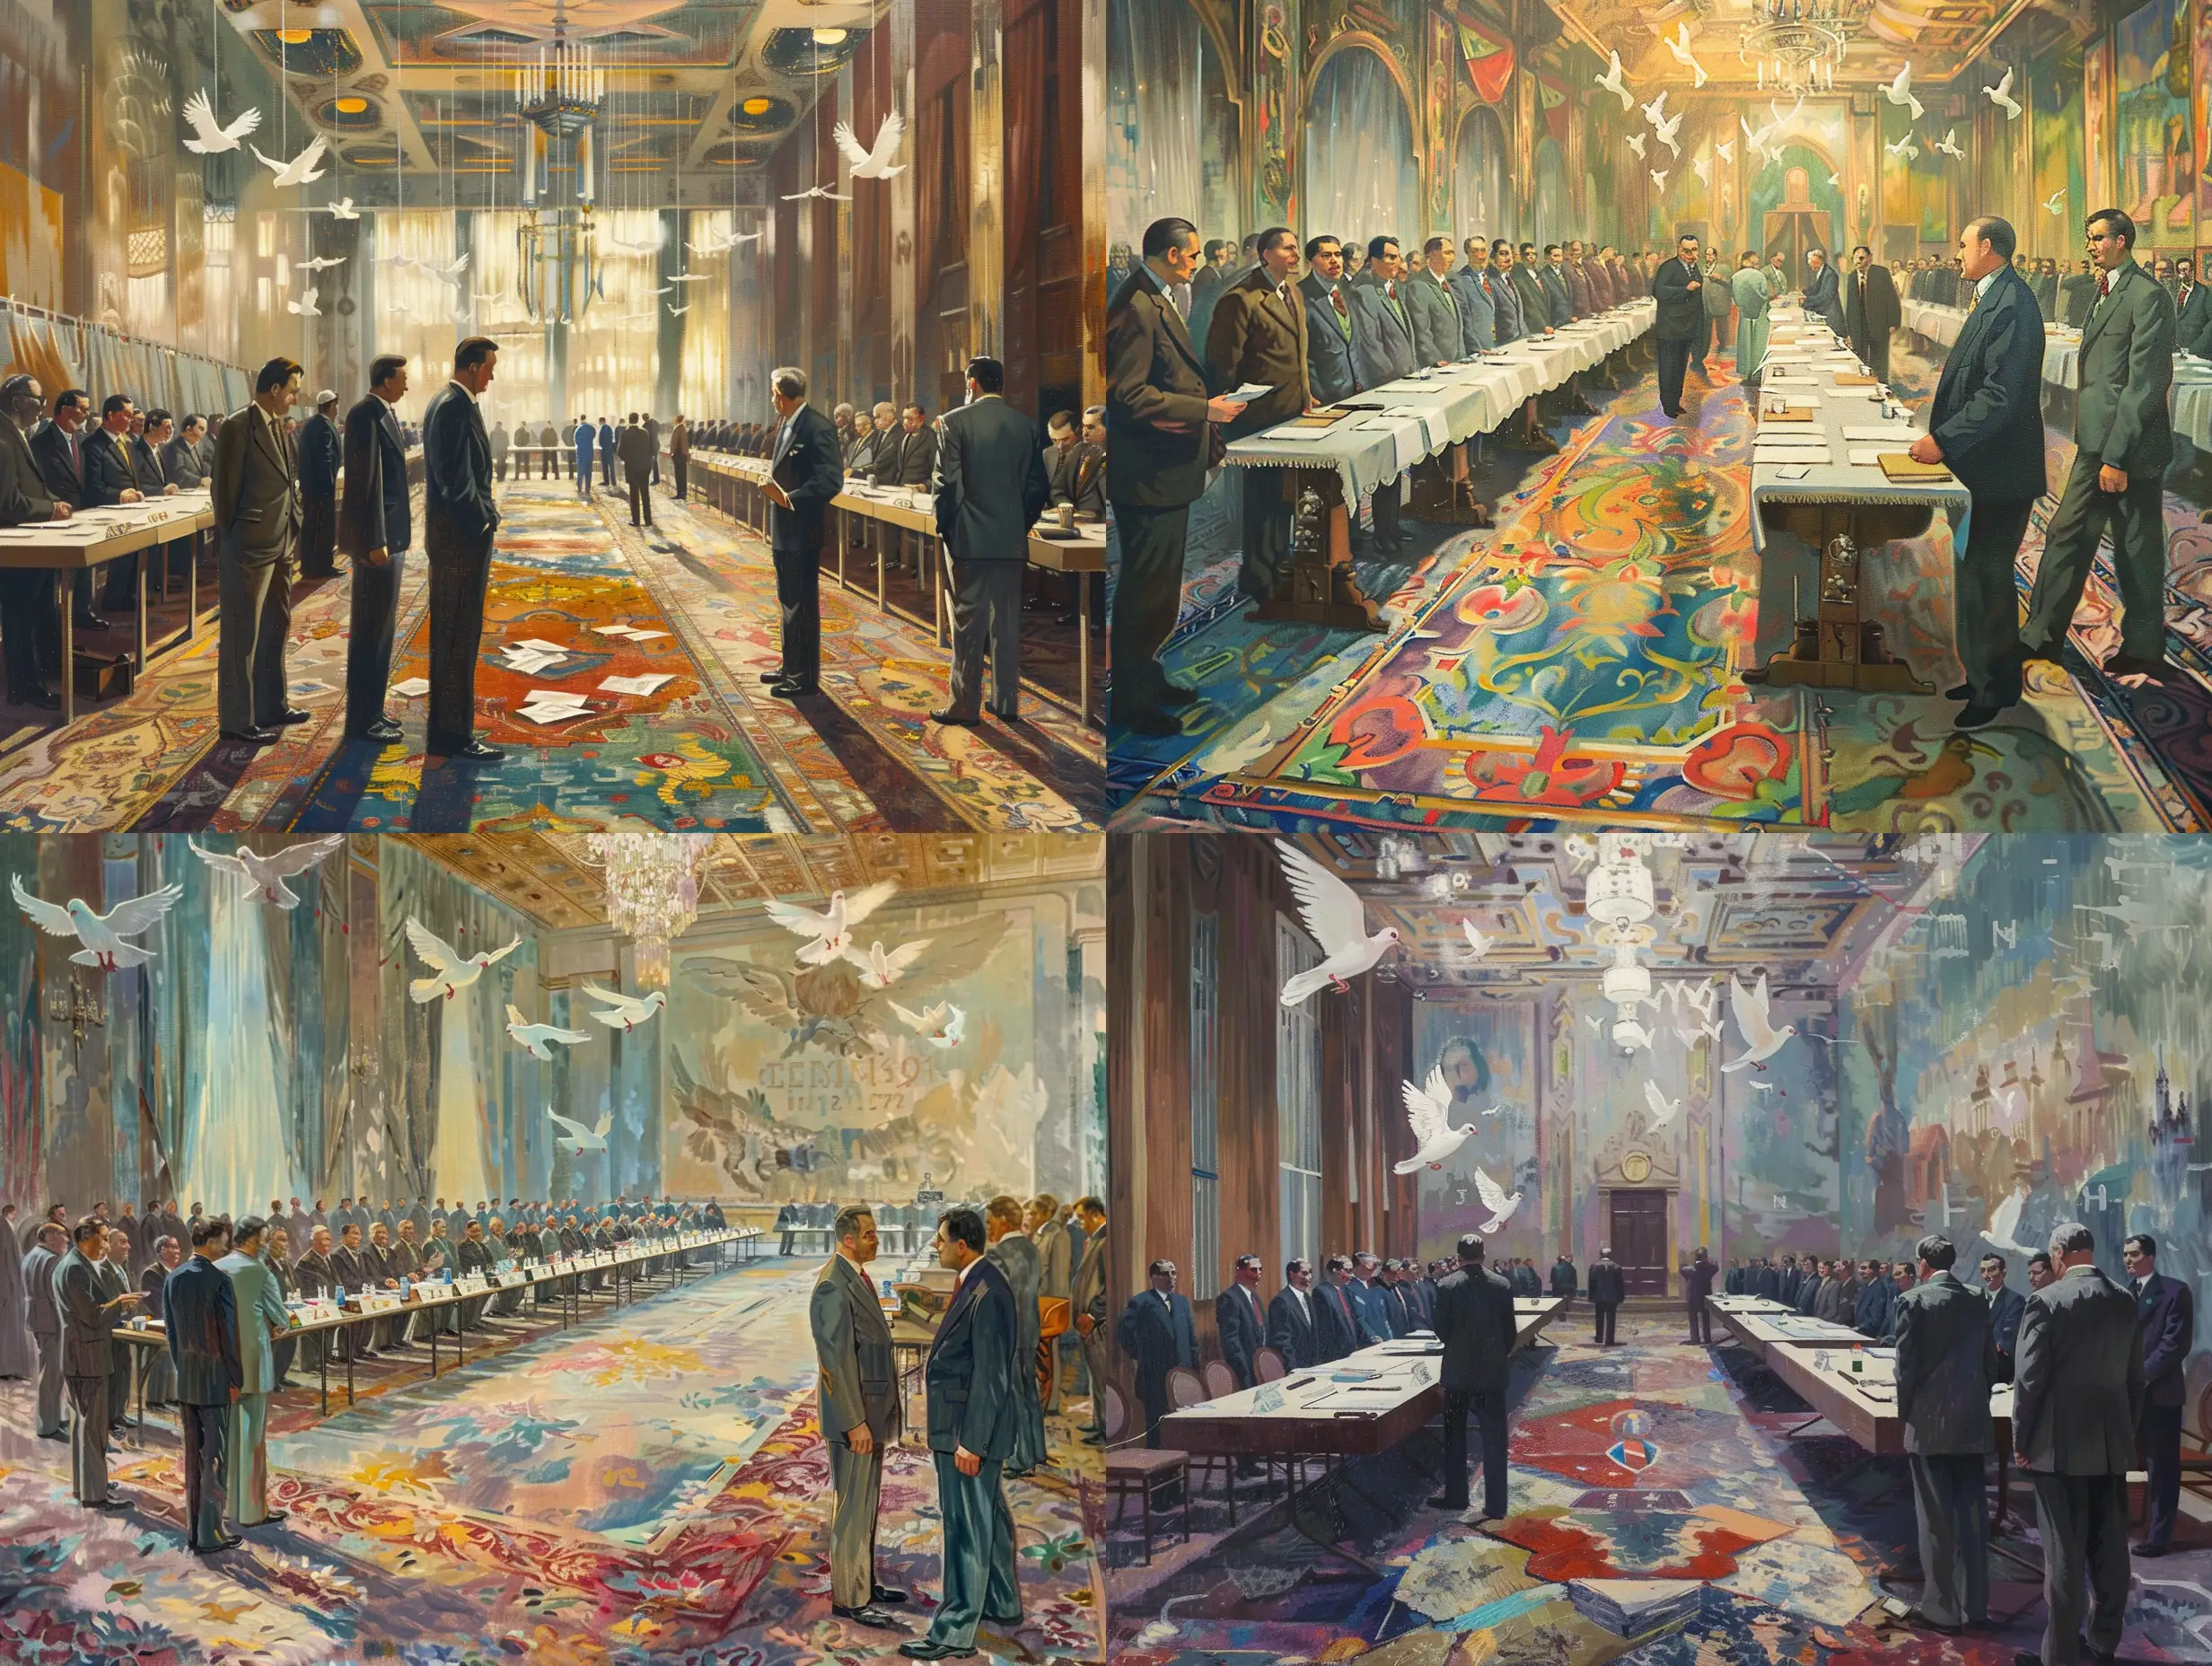 Eastern-European-Delegation-Meeting-in-Festive-50s-Style-Hall